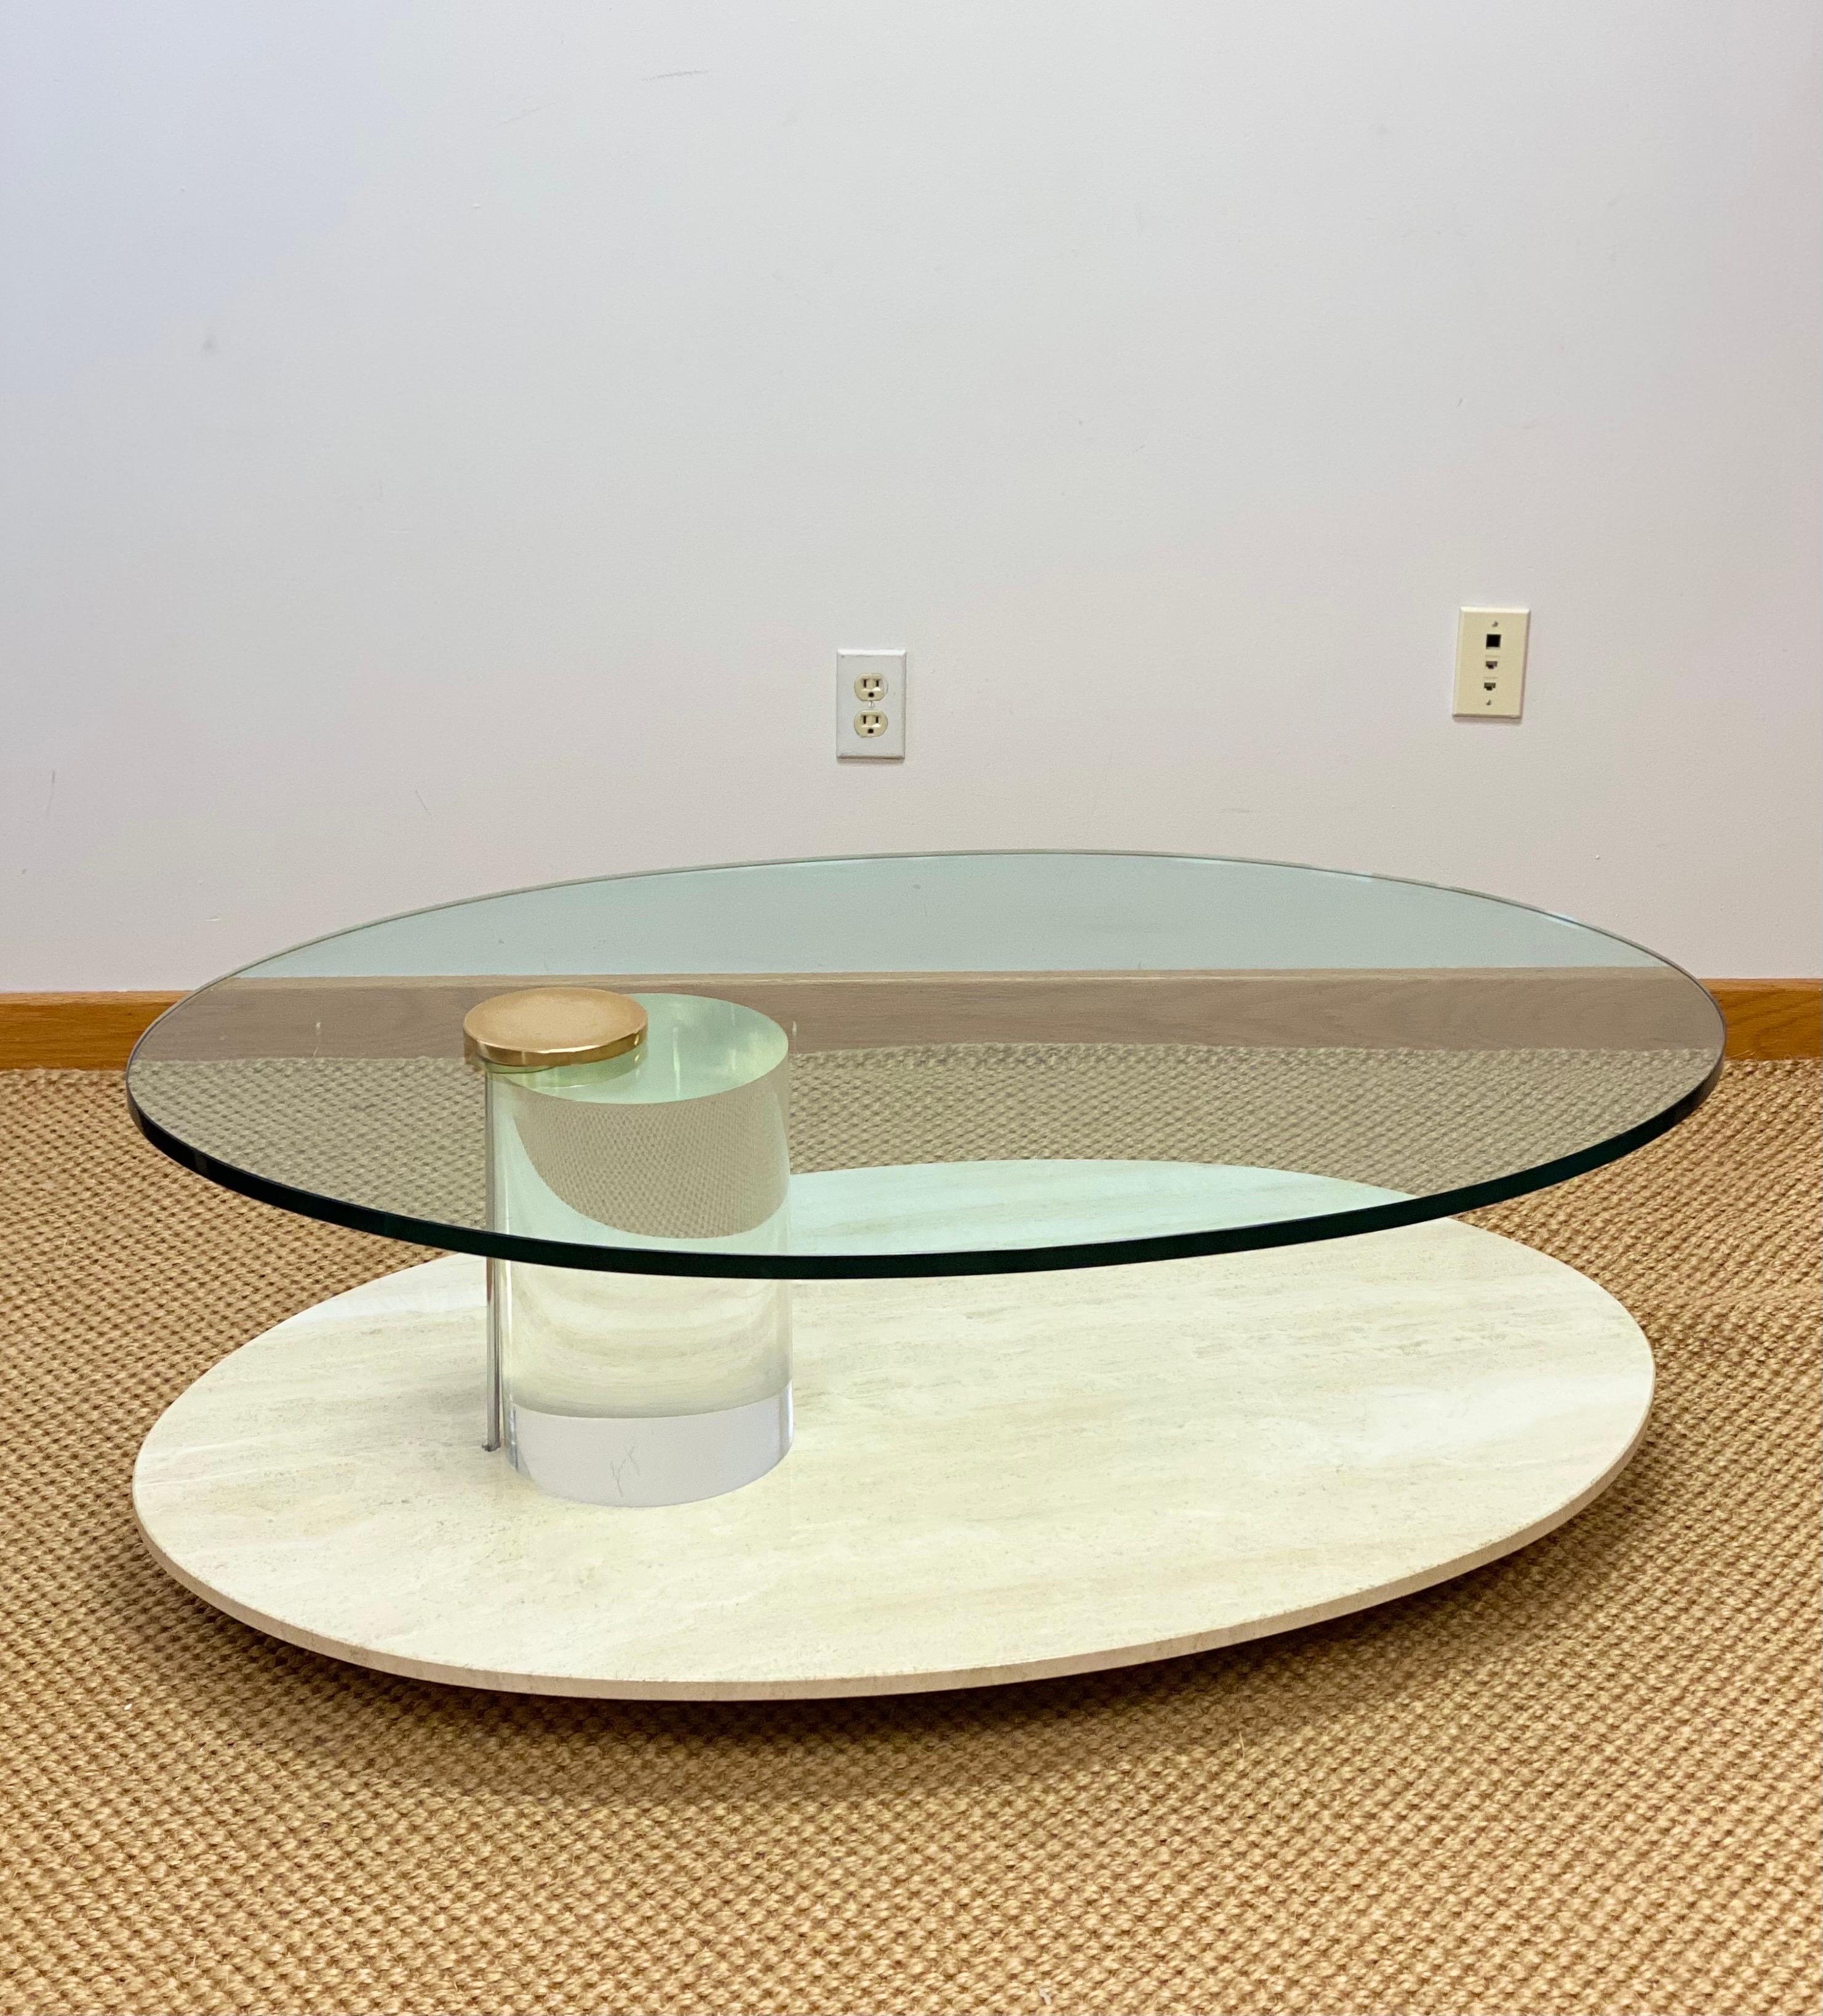 We are very pleased to offer a beautiful, sleek table by Lion in Frost circa the 1970s. Elegant in its simplicity and eye-catching in its execution, this piece is a dramatic anchor for the living space. A two-tiered, open oval construction stacks up